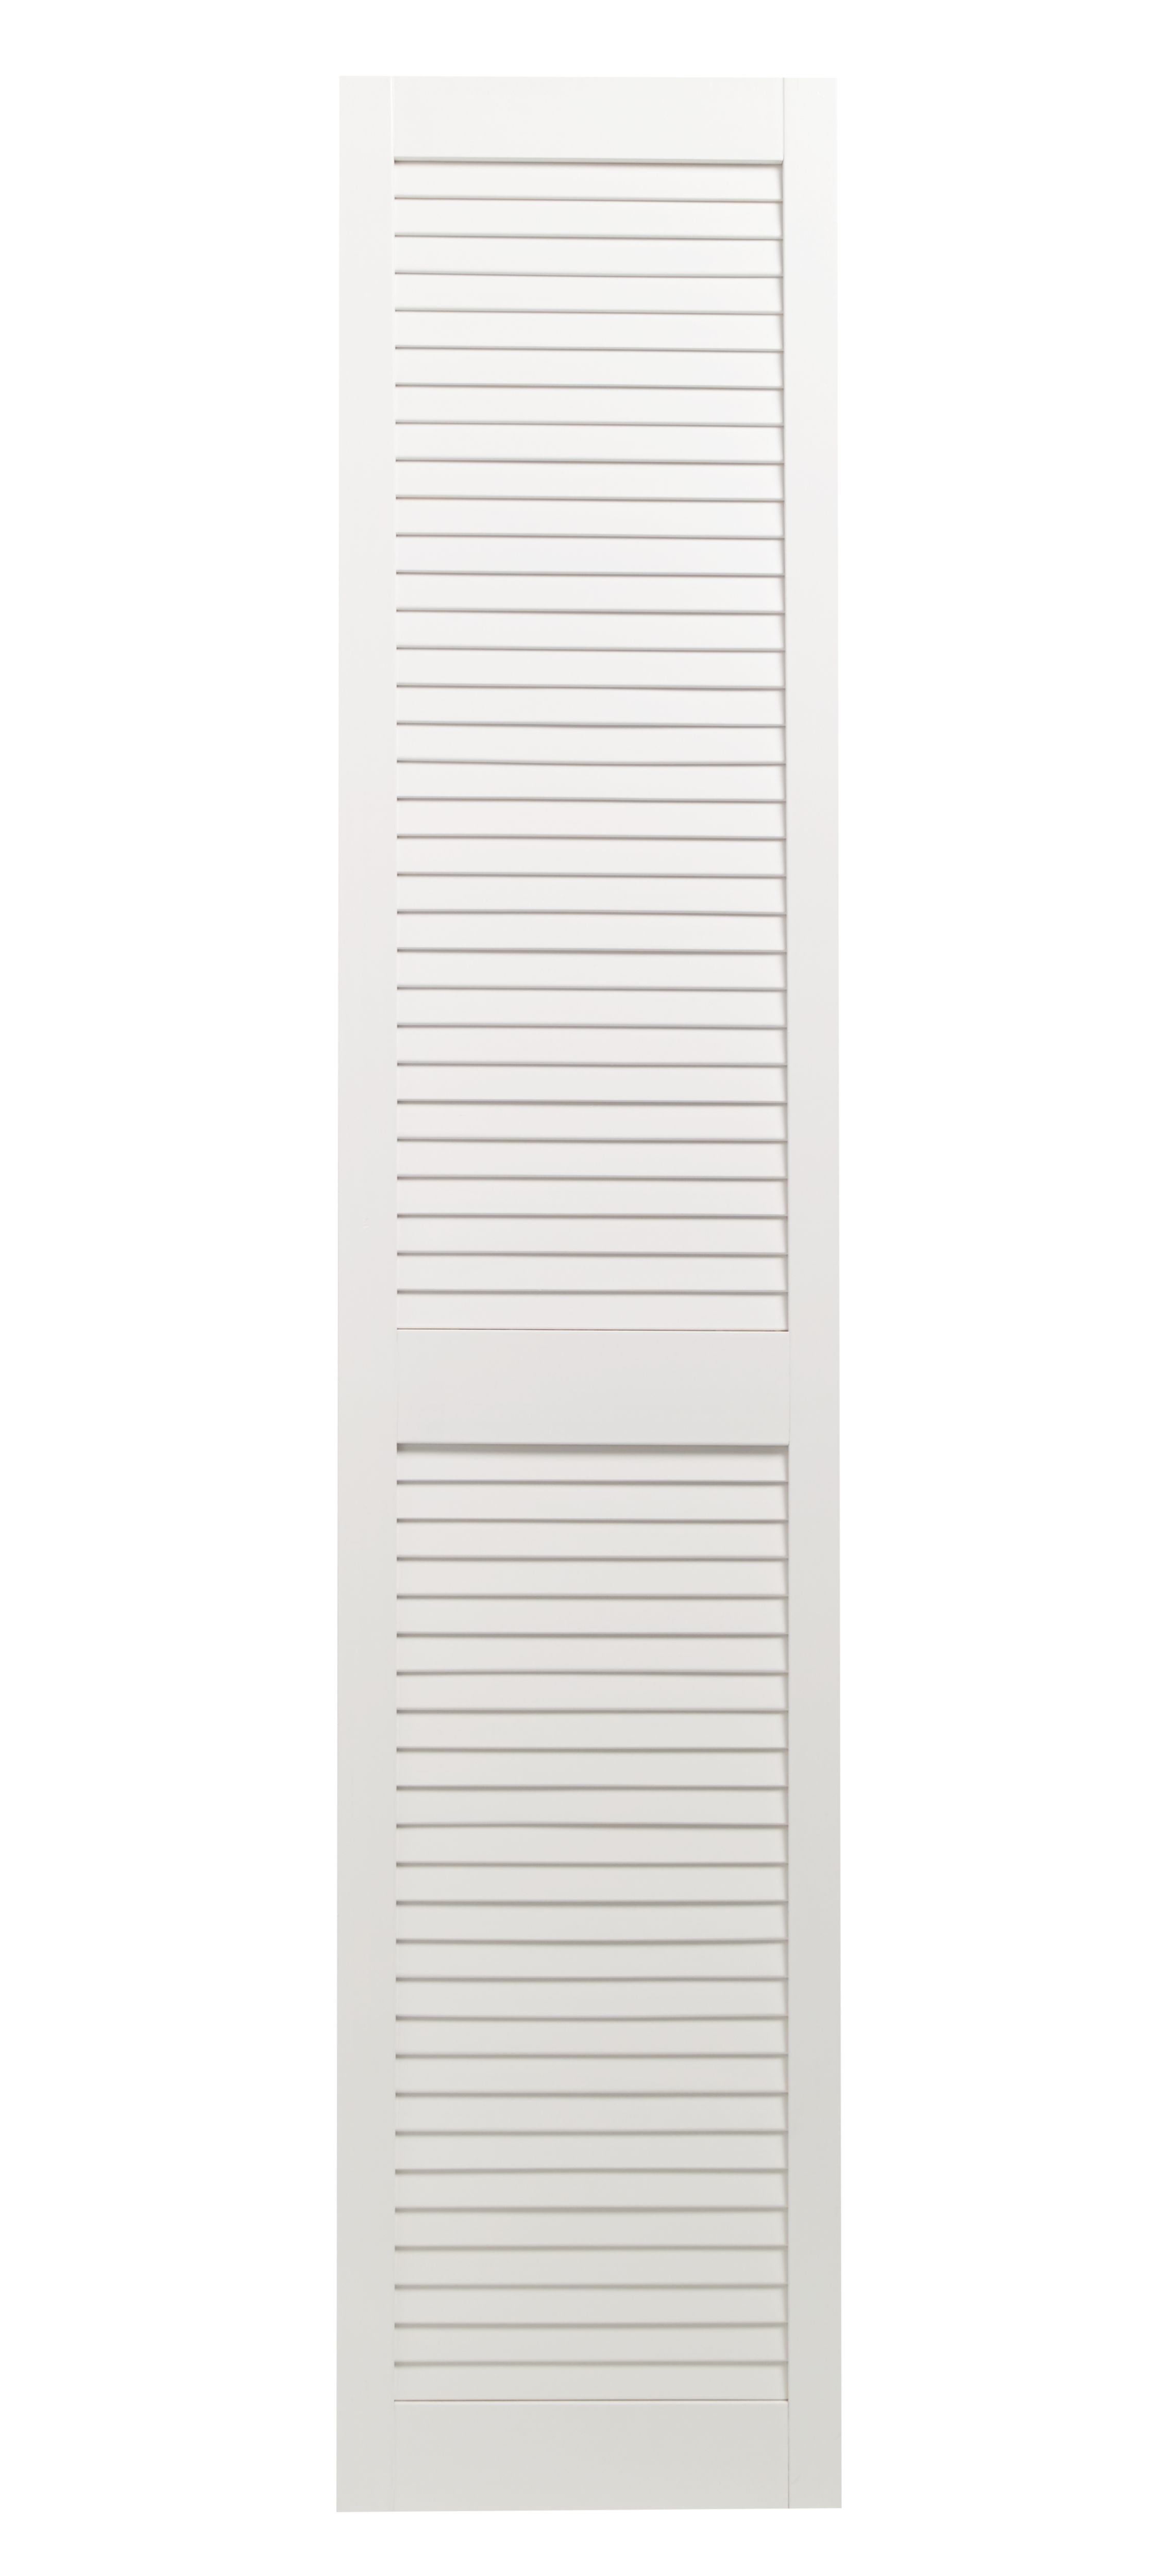 Image of Wickes White Closed Internal Louvre Door - 1829 x 381mm